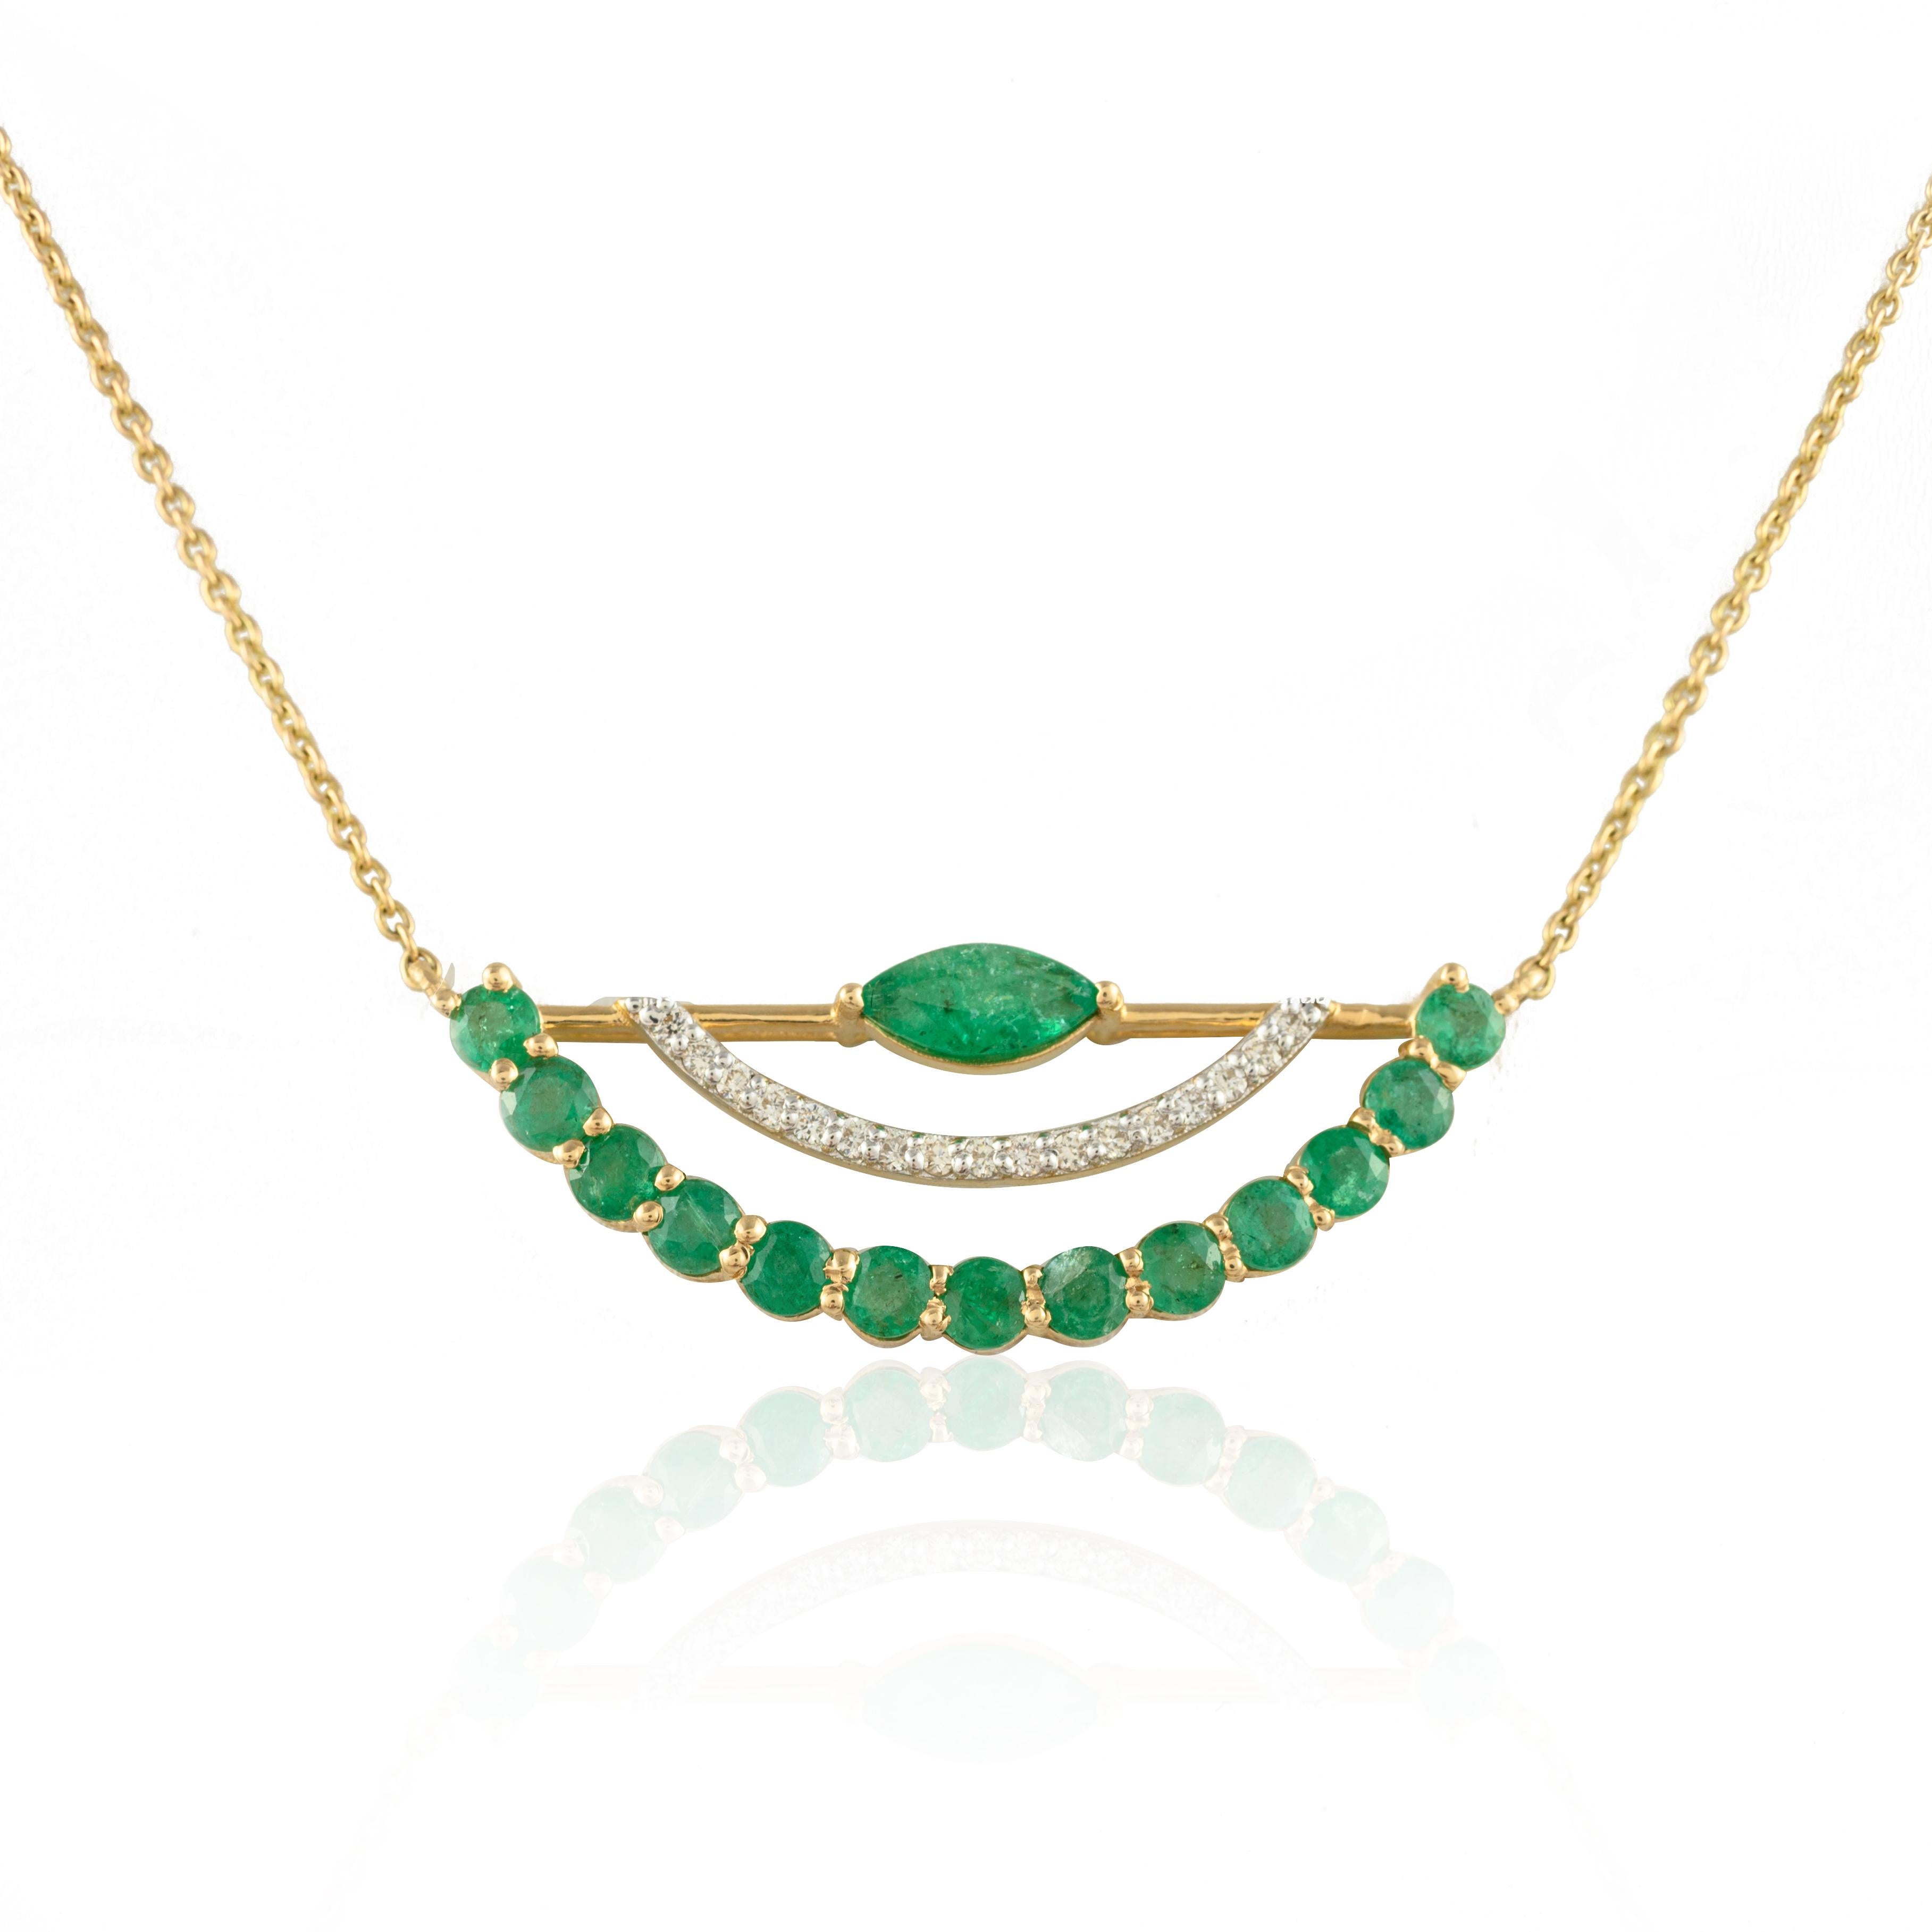 Natural Vivid Green 1.87ct Emerald Diamond Chain Necklace in 14k Yellow Gold For Sale 2